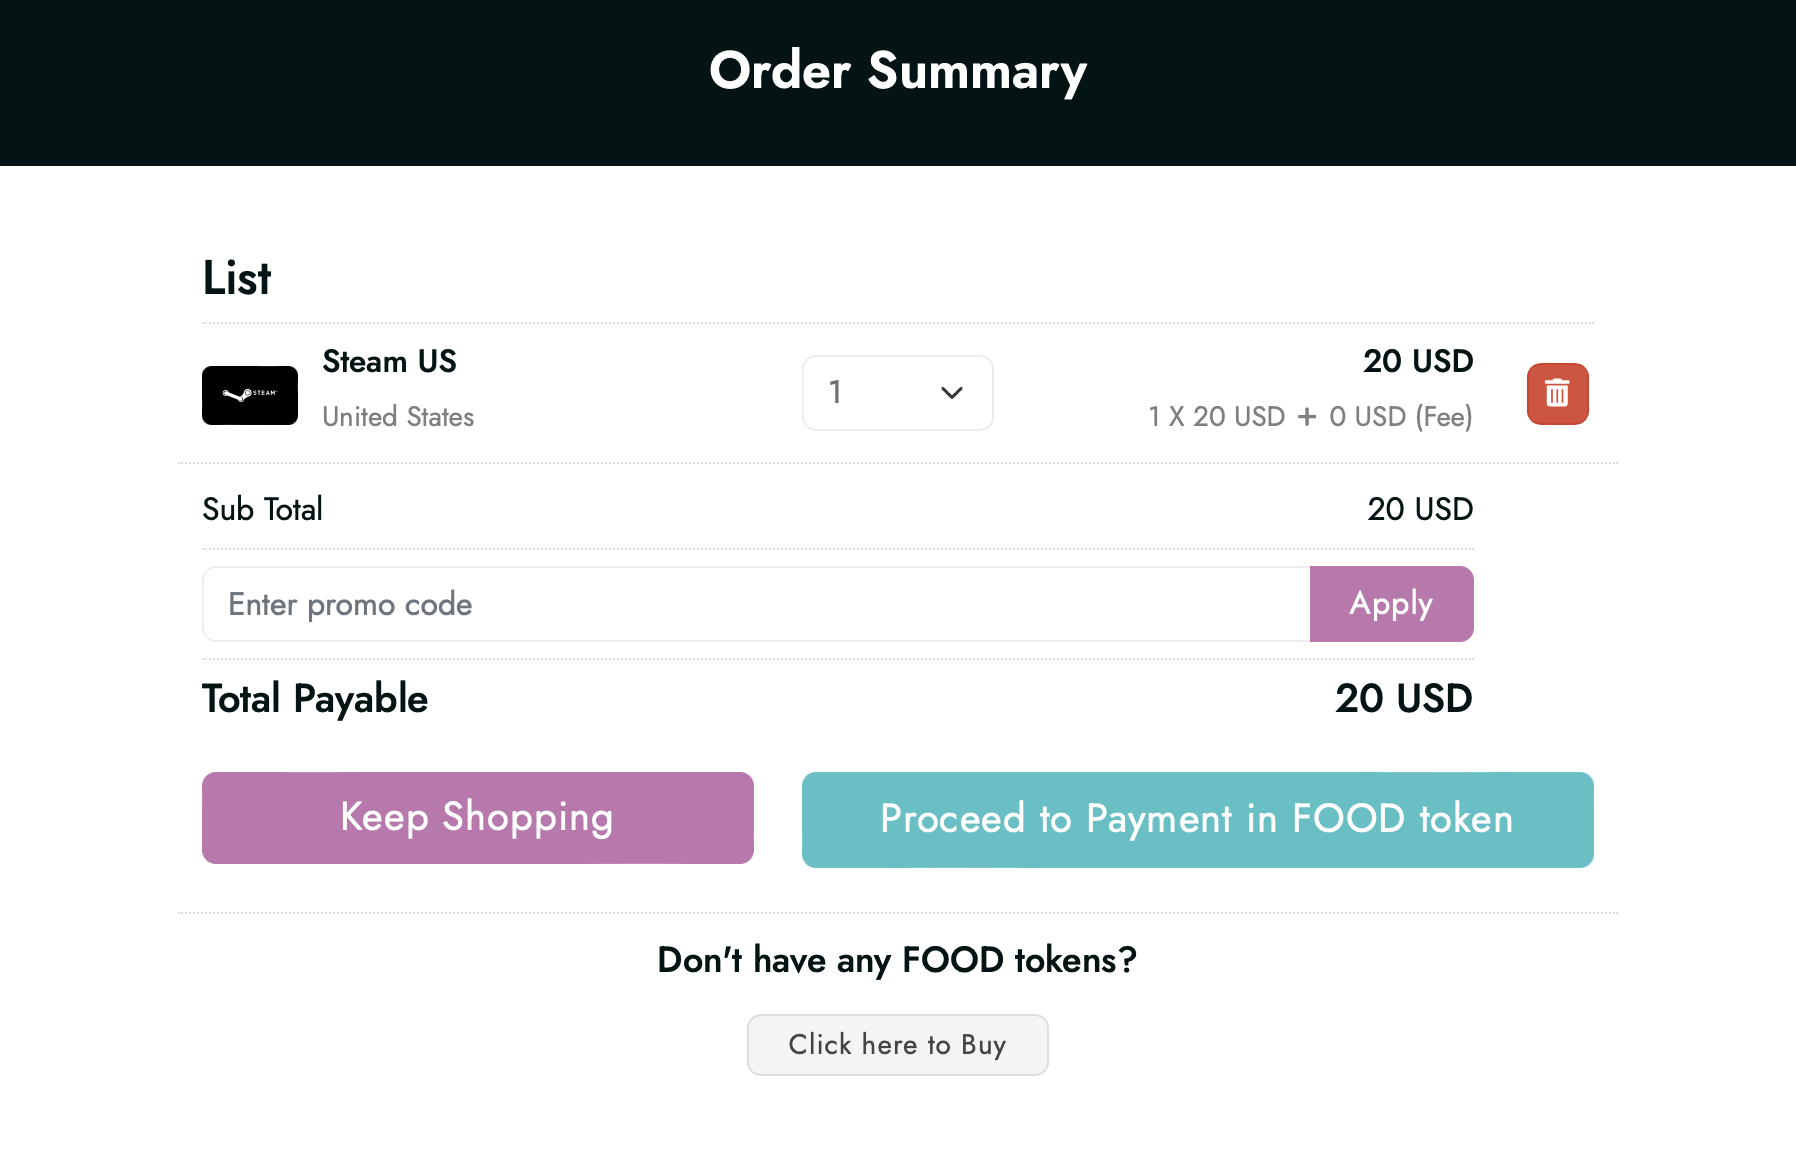 The order summary screen of Live on Crypto. Source: Live on Crypto